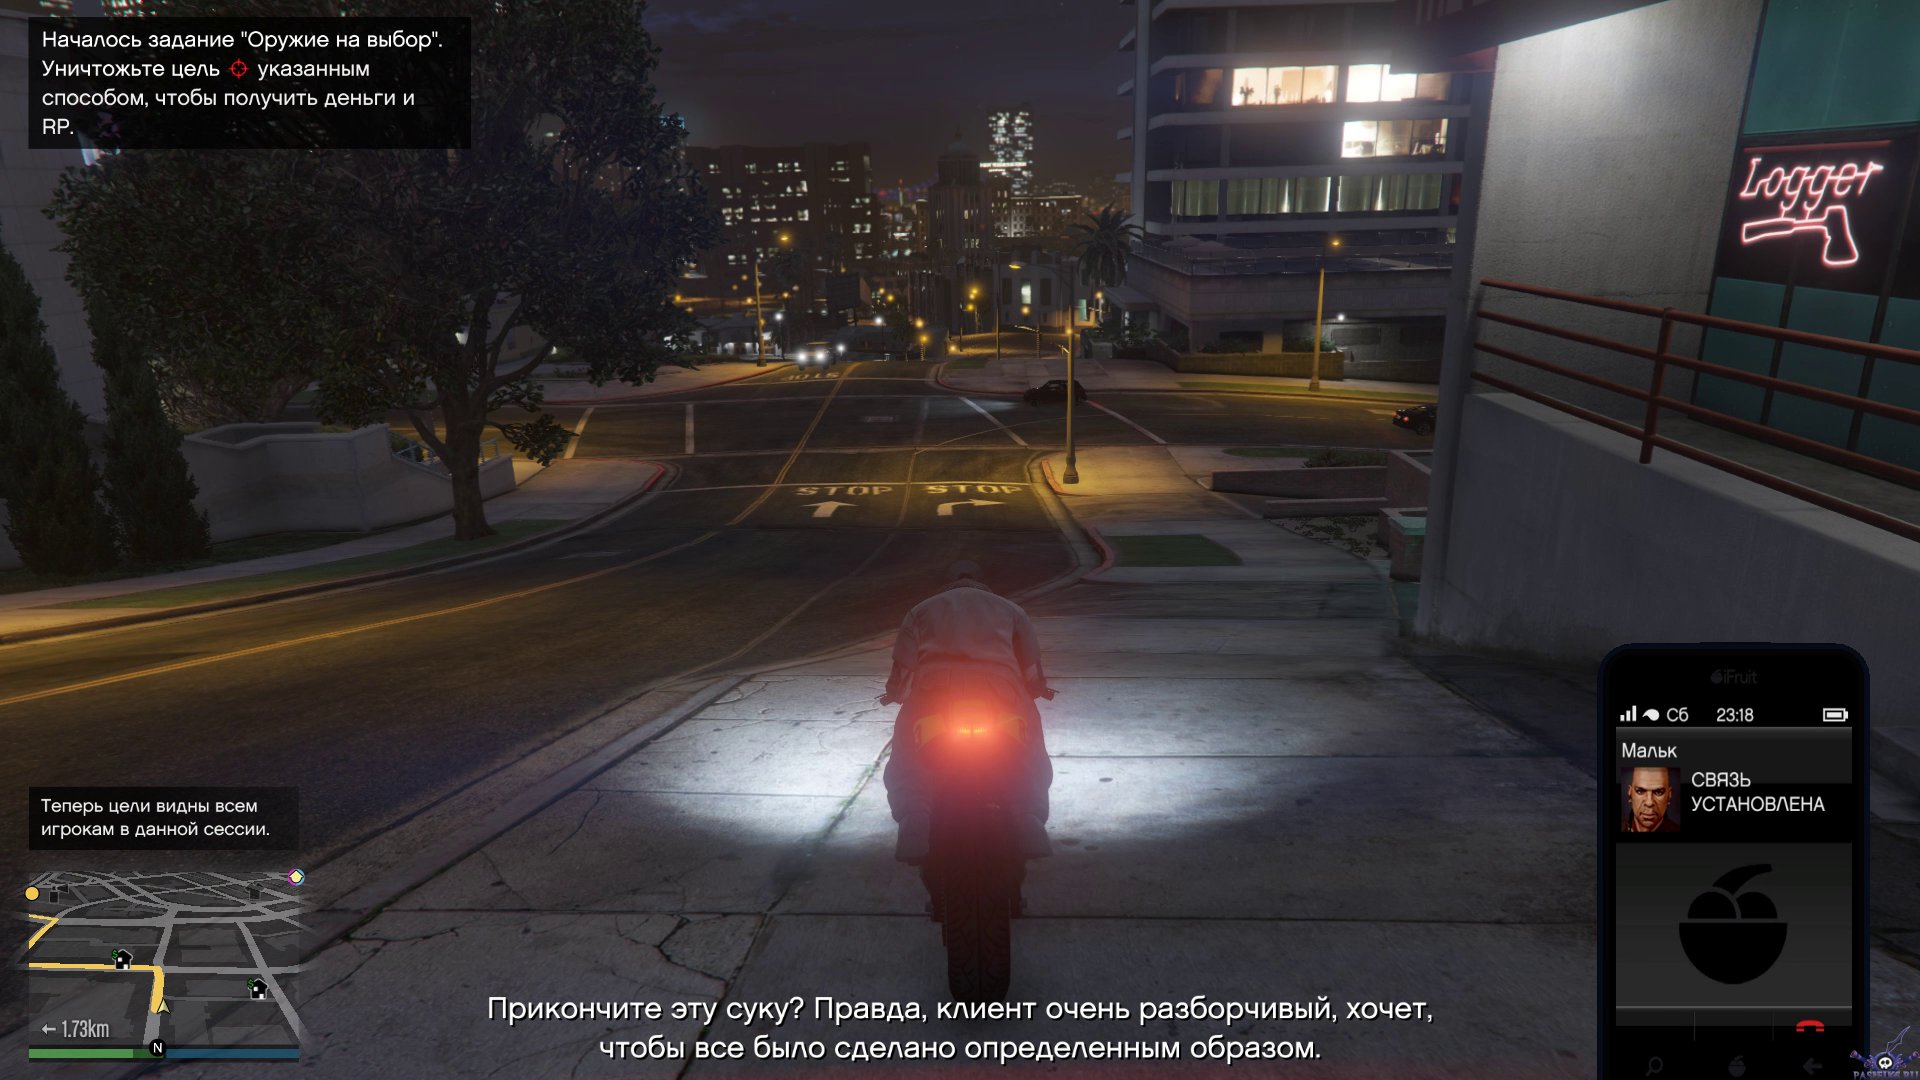 Unsupported gta 5 version detected spb may not work properly фото 23